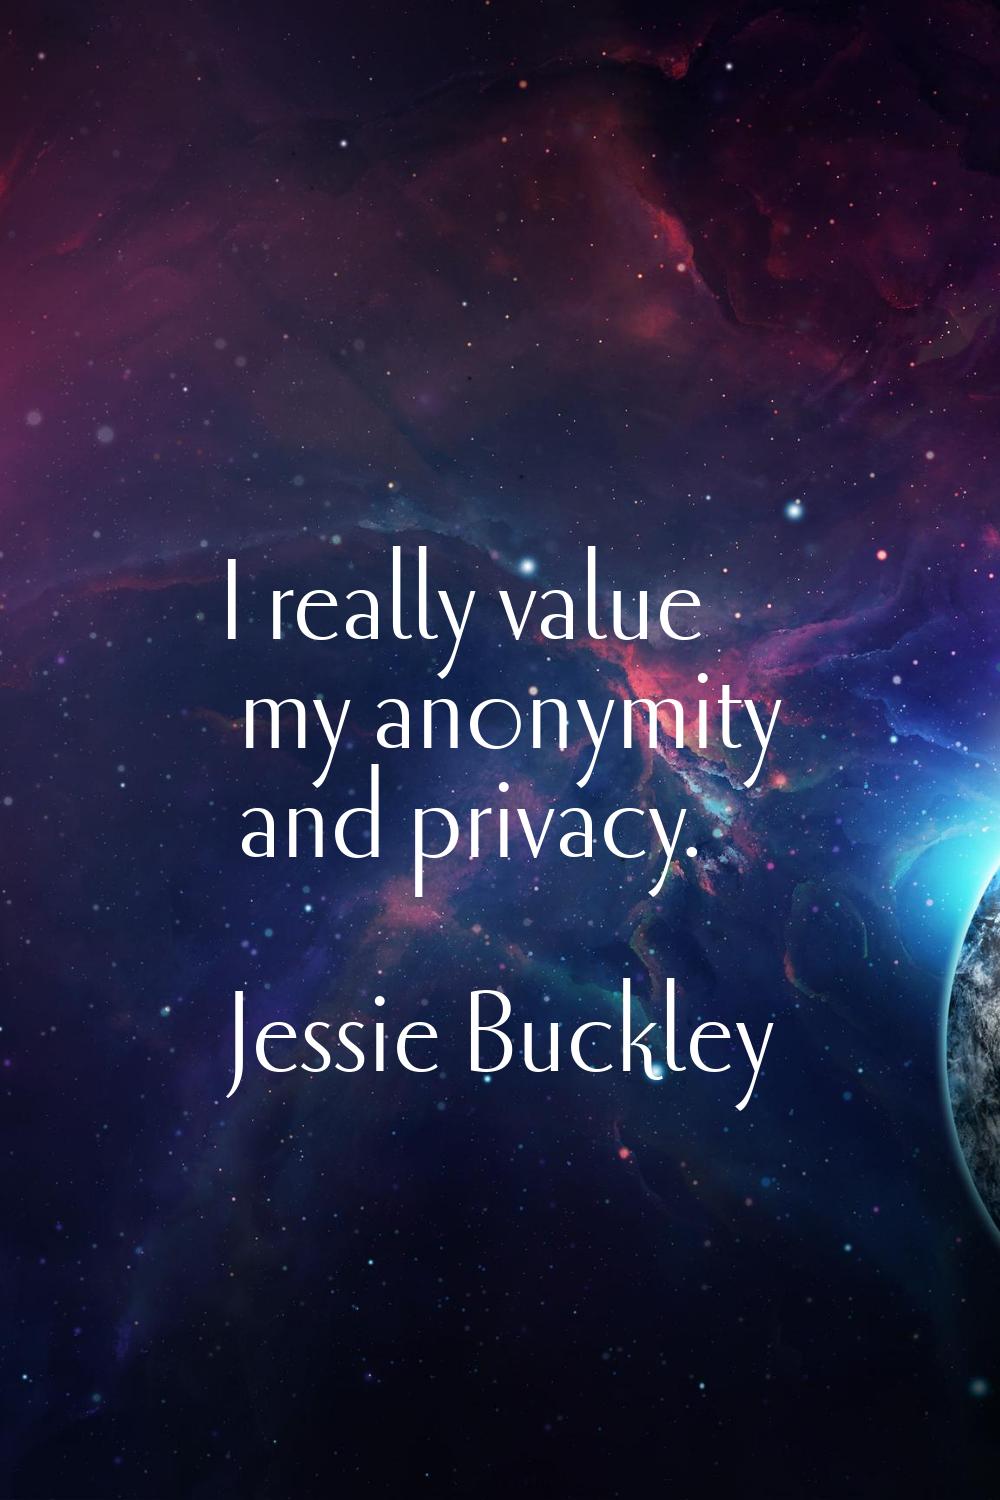 I really value my anonymity and privacy.